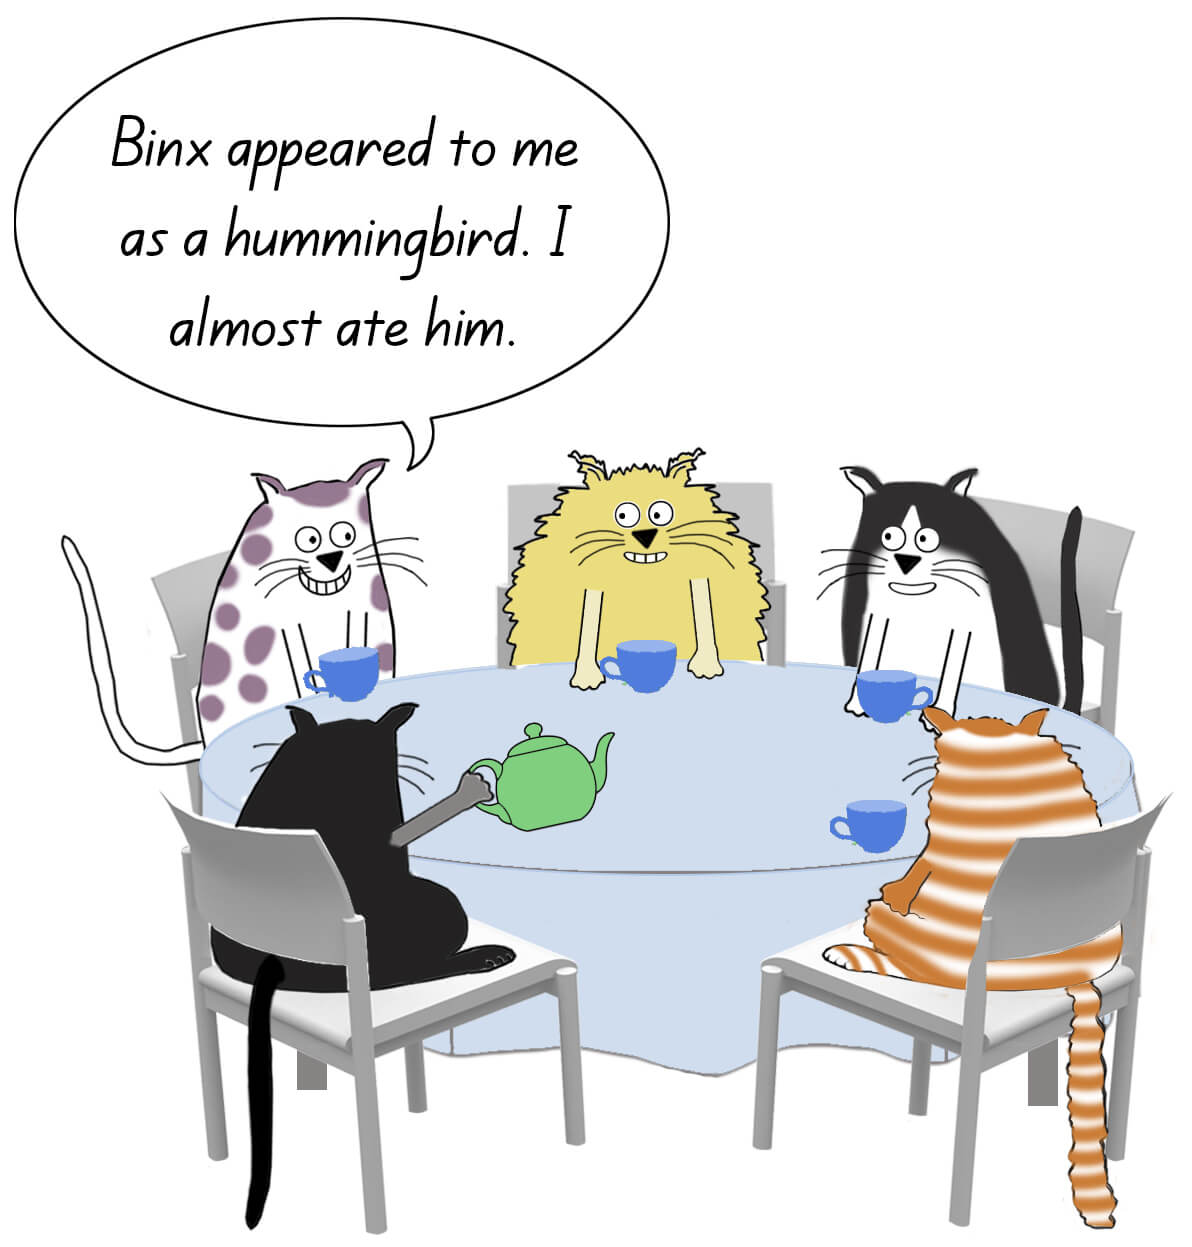 Cartoon cats sitting around a table and one is saying "Binx appeared to me as a hummingbird and I almost ate him."